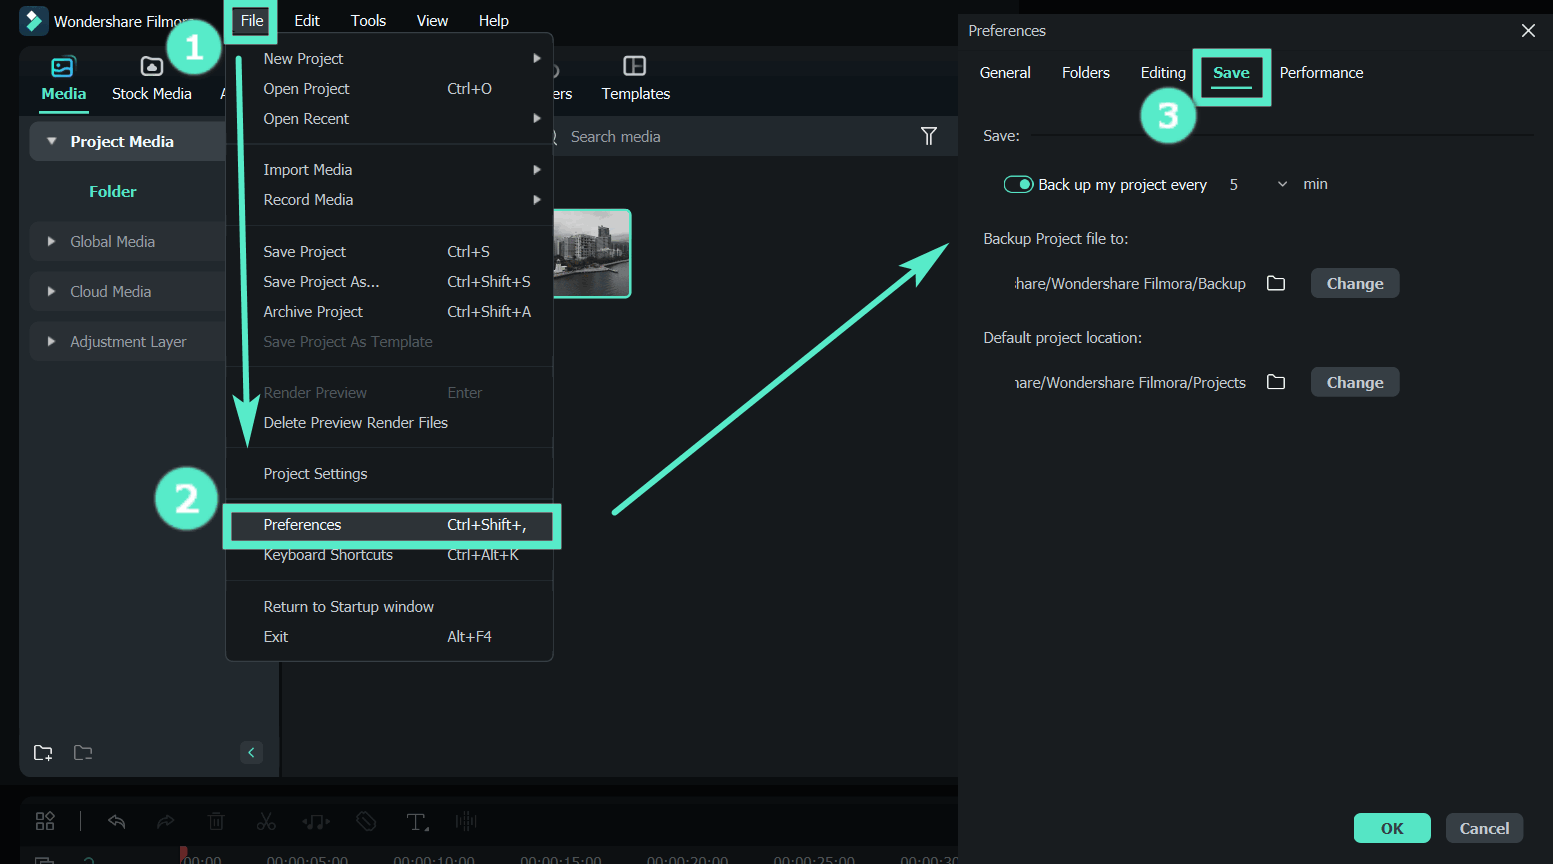 Save Project Settings